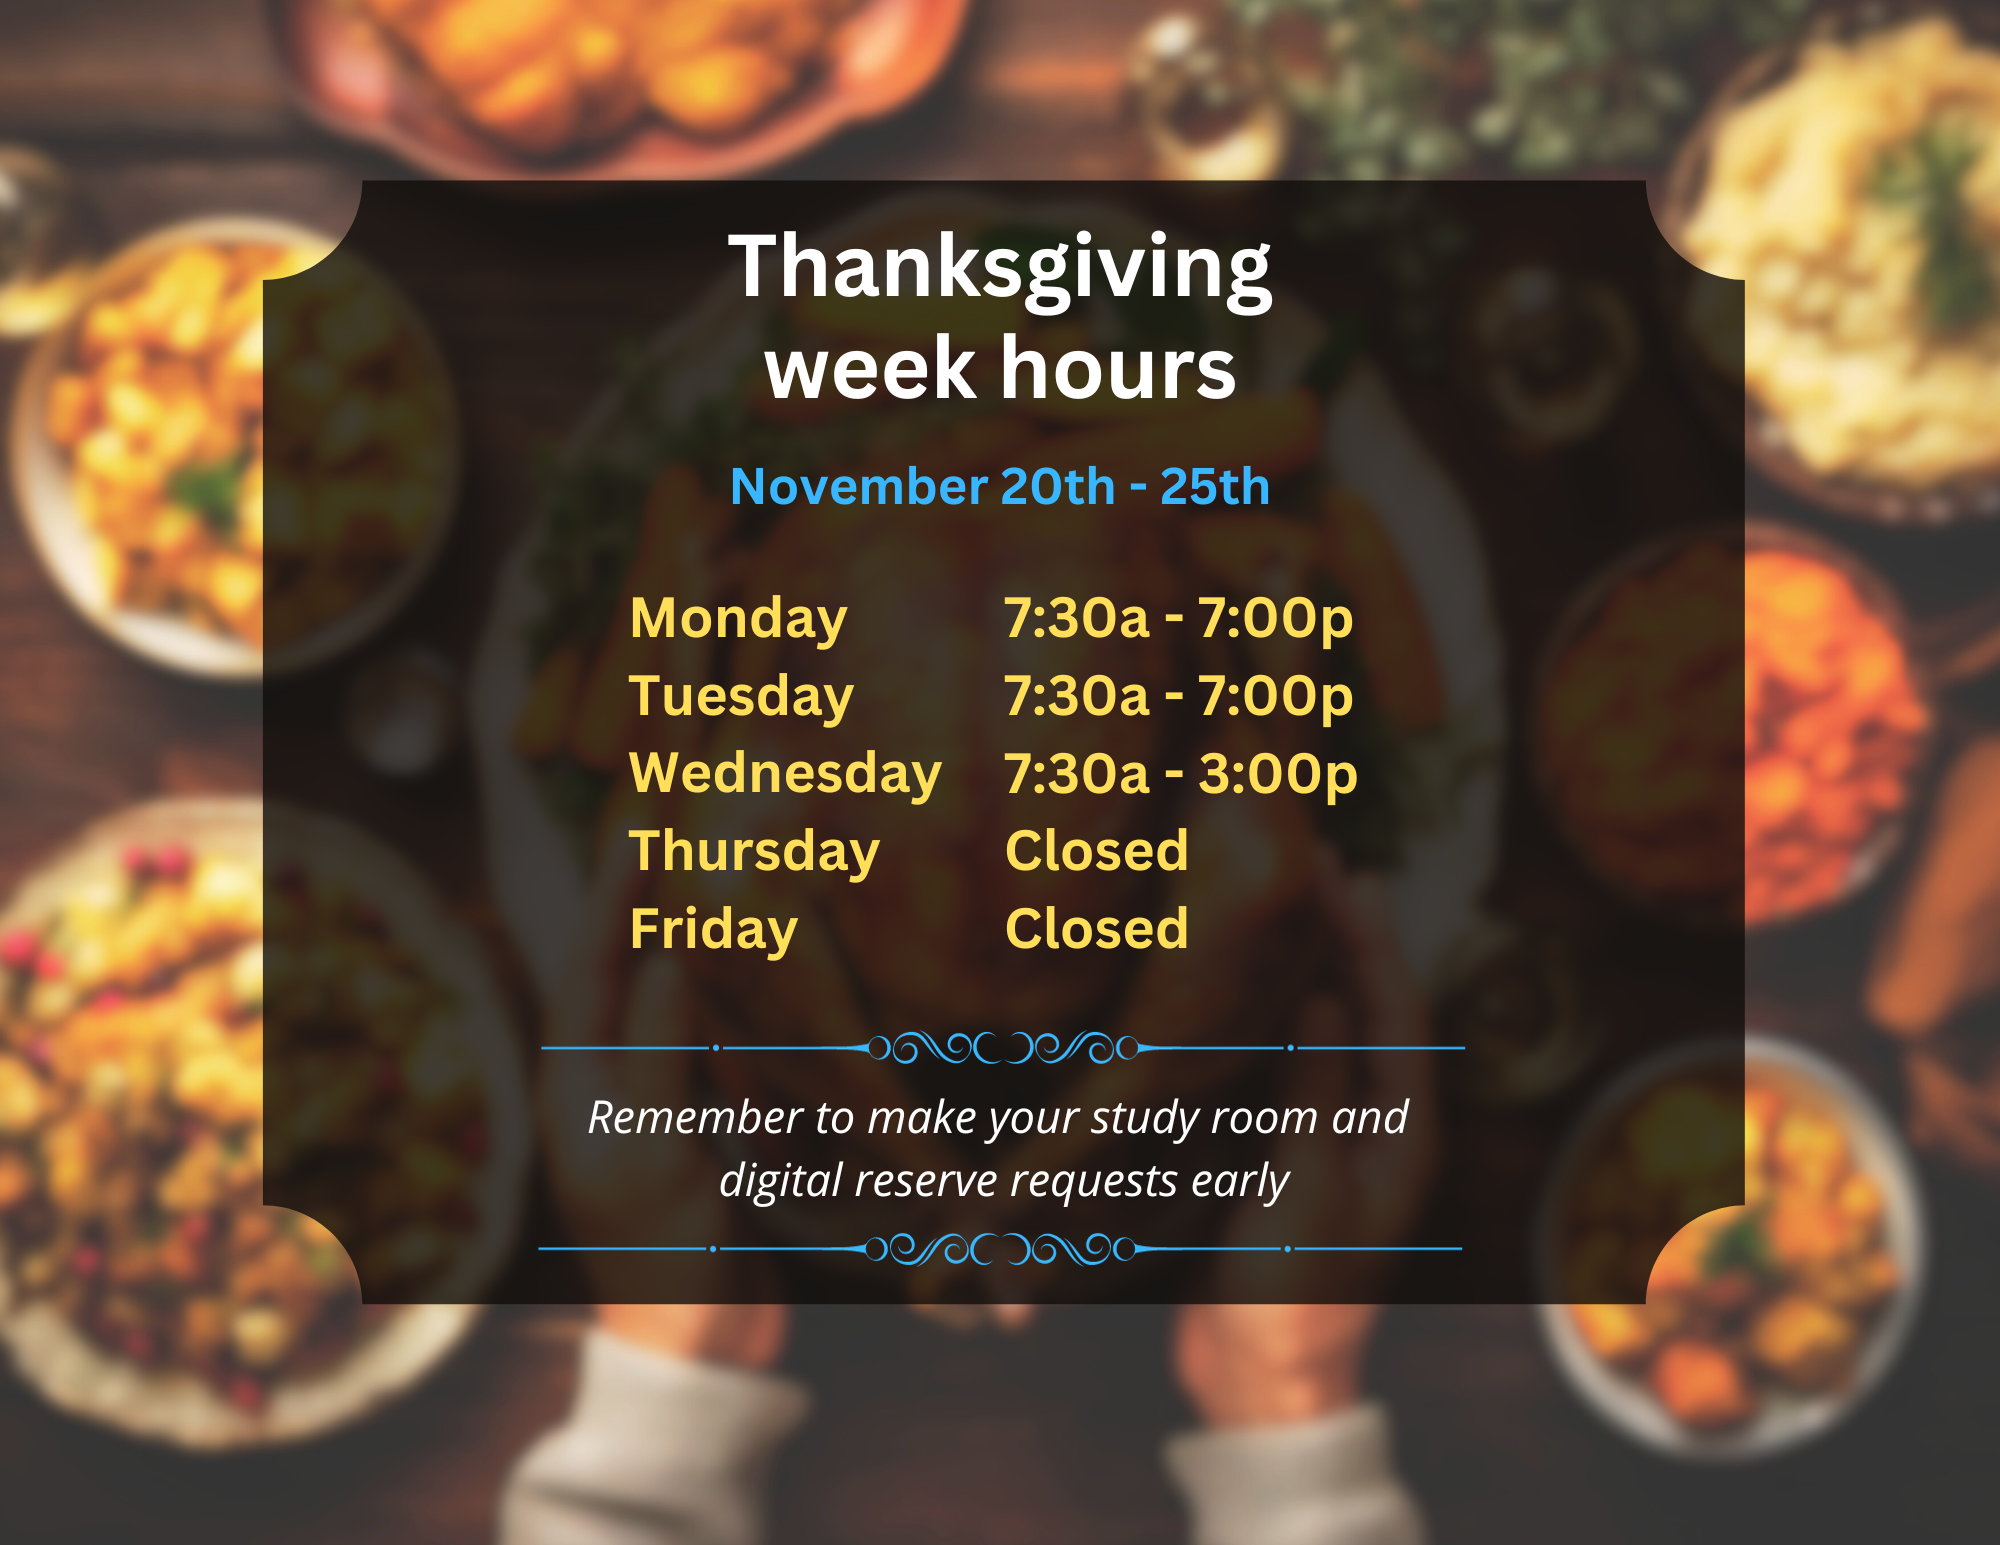 AVC Libraries will have normal hours Monday & Tuesday, but will close early at 3p on Wednesday. Thursday and Friday the libraries will be closed for Thanksgiving.